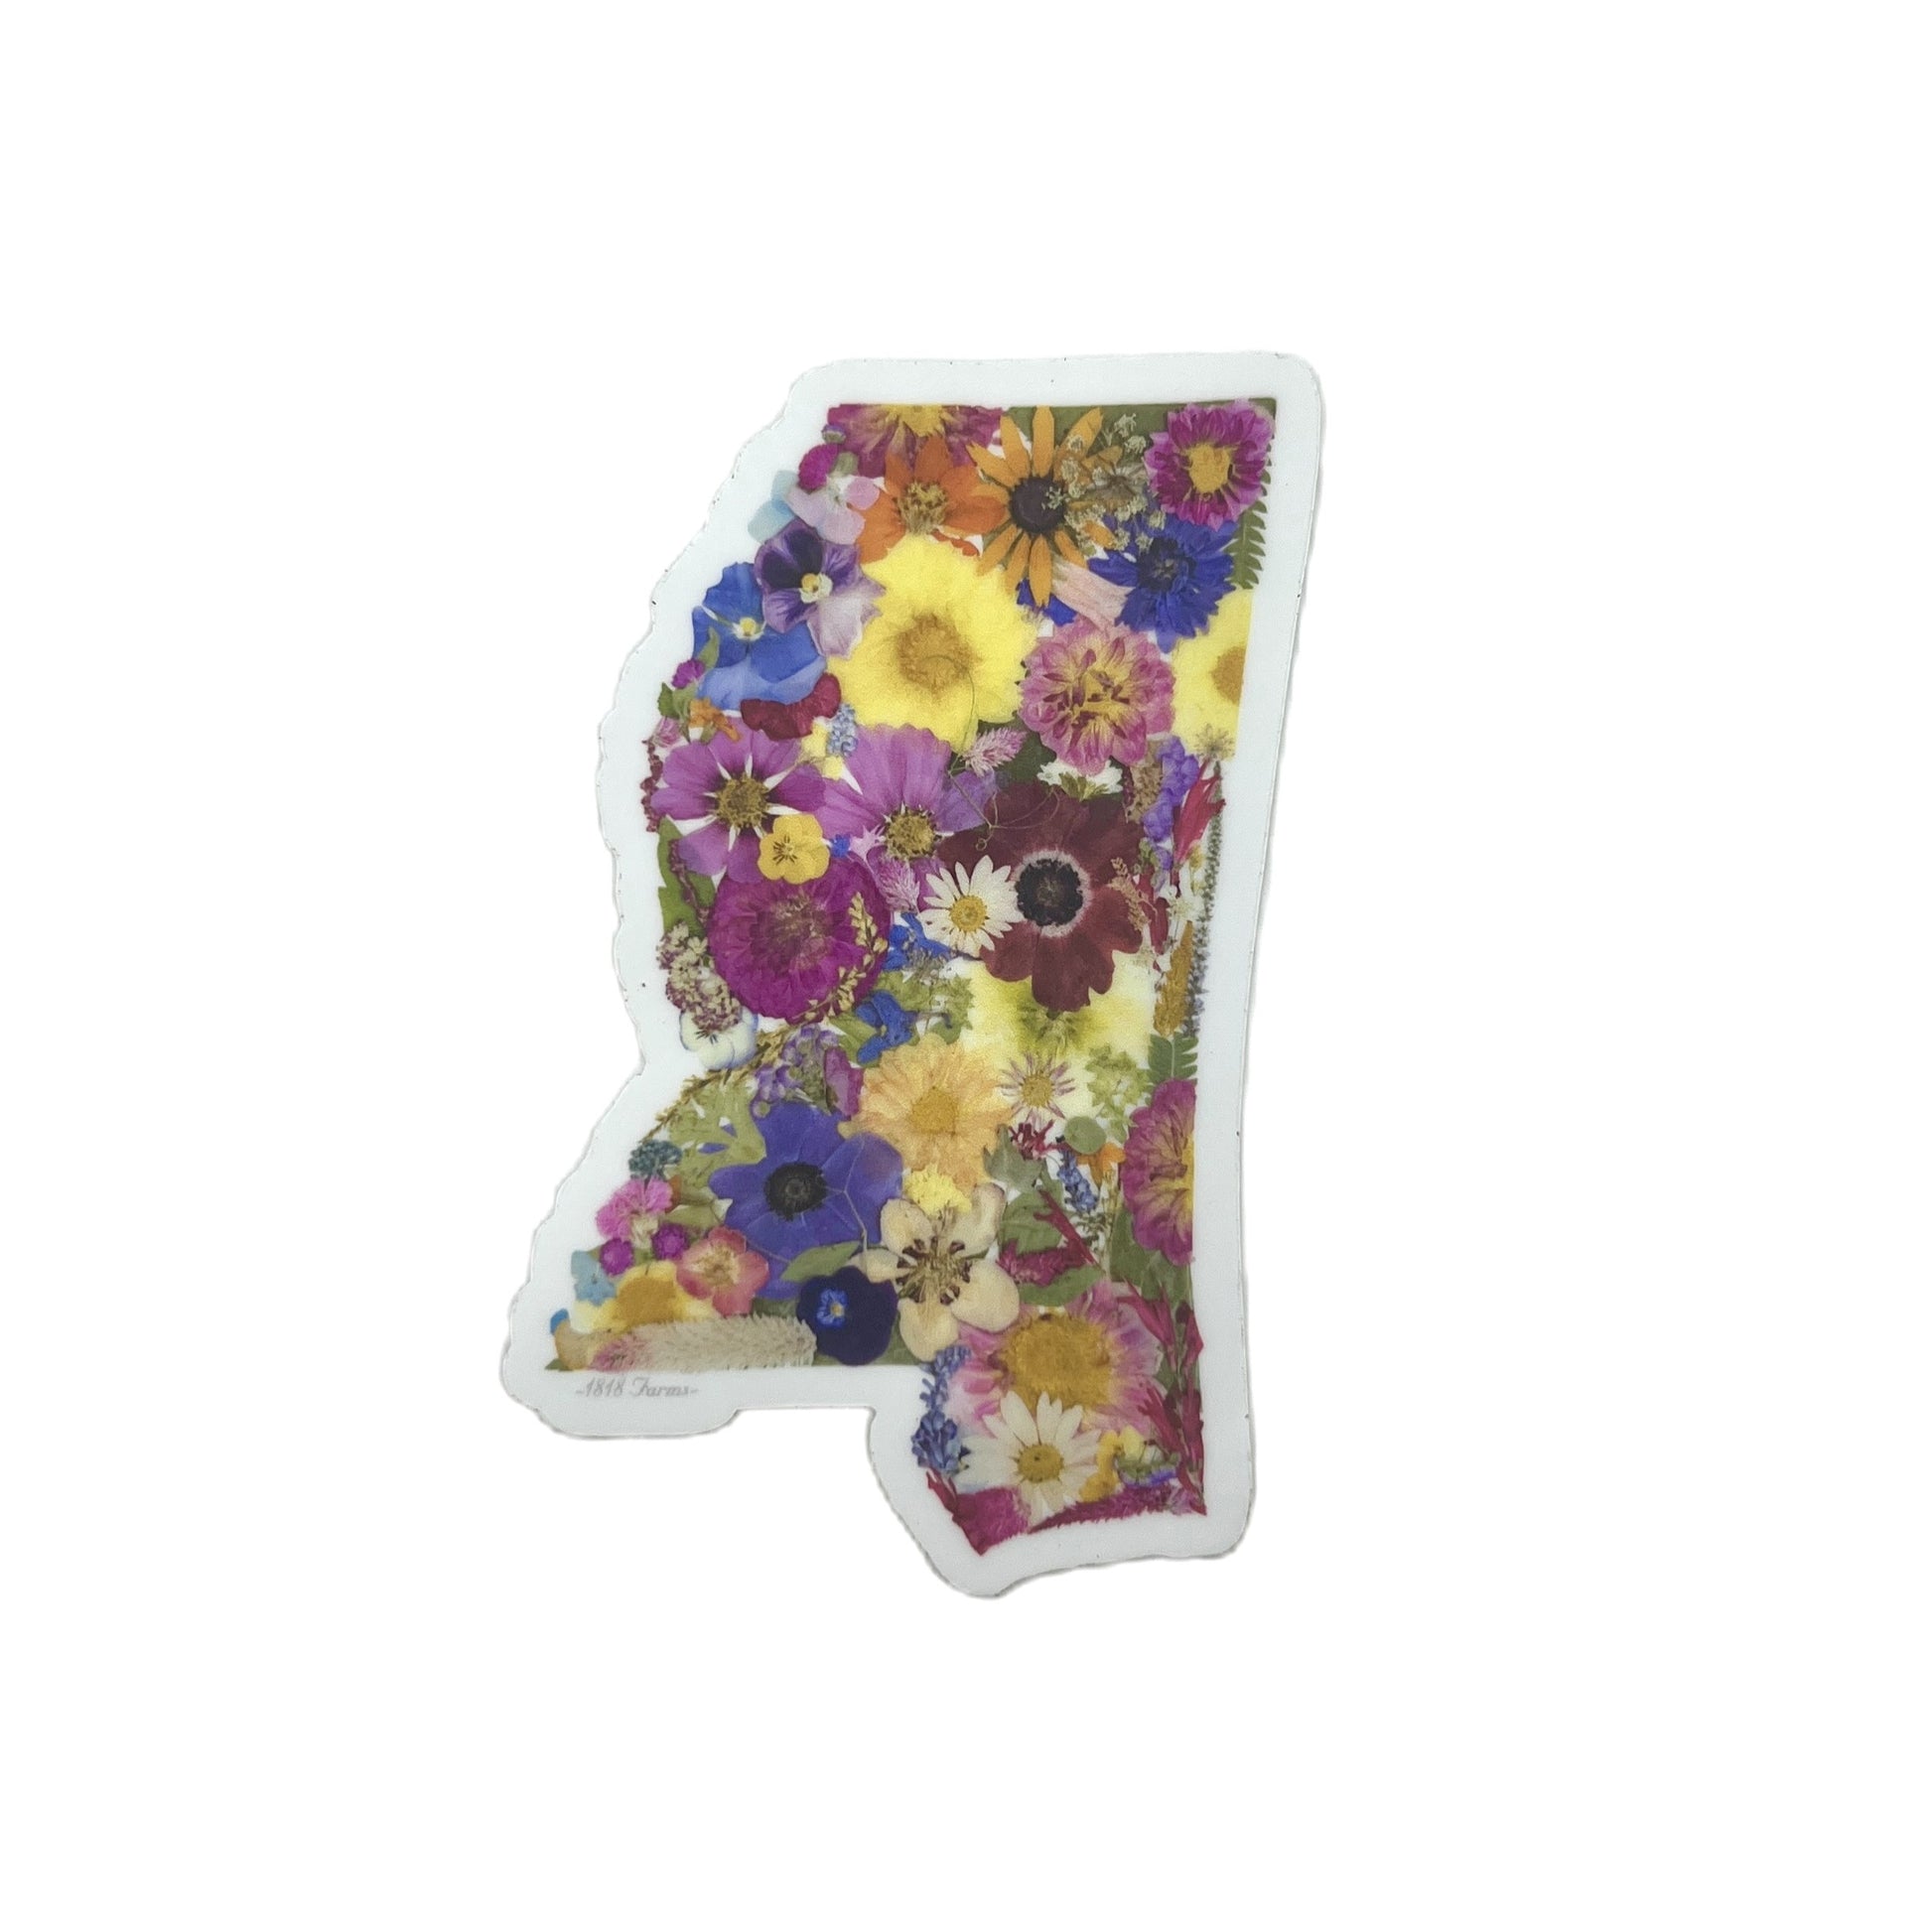 Mississippi Themed Vinyl Sticker Featuring Dried, Pressed Flowers - "Where I Bloom" Collection Vinyl Sticker 1818 Farms   